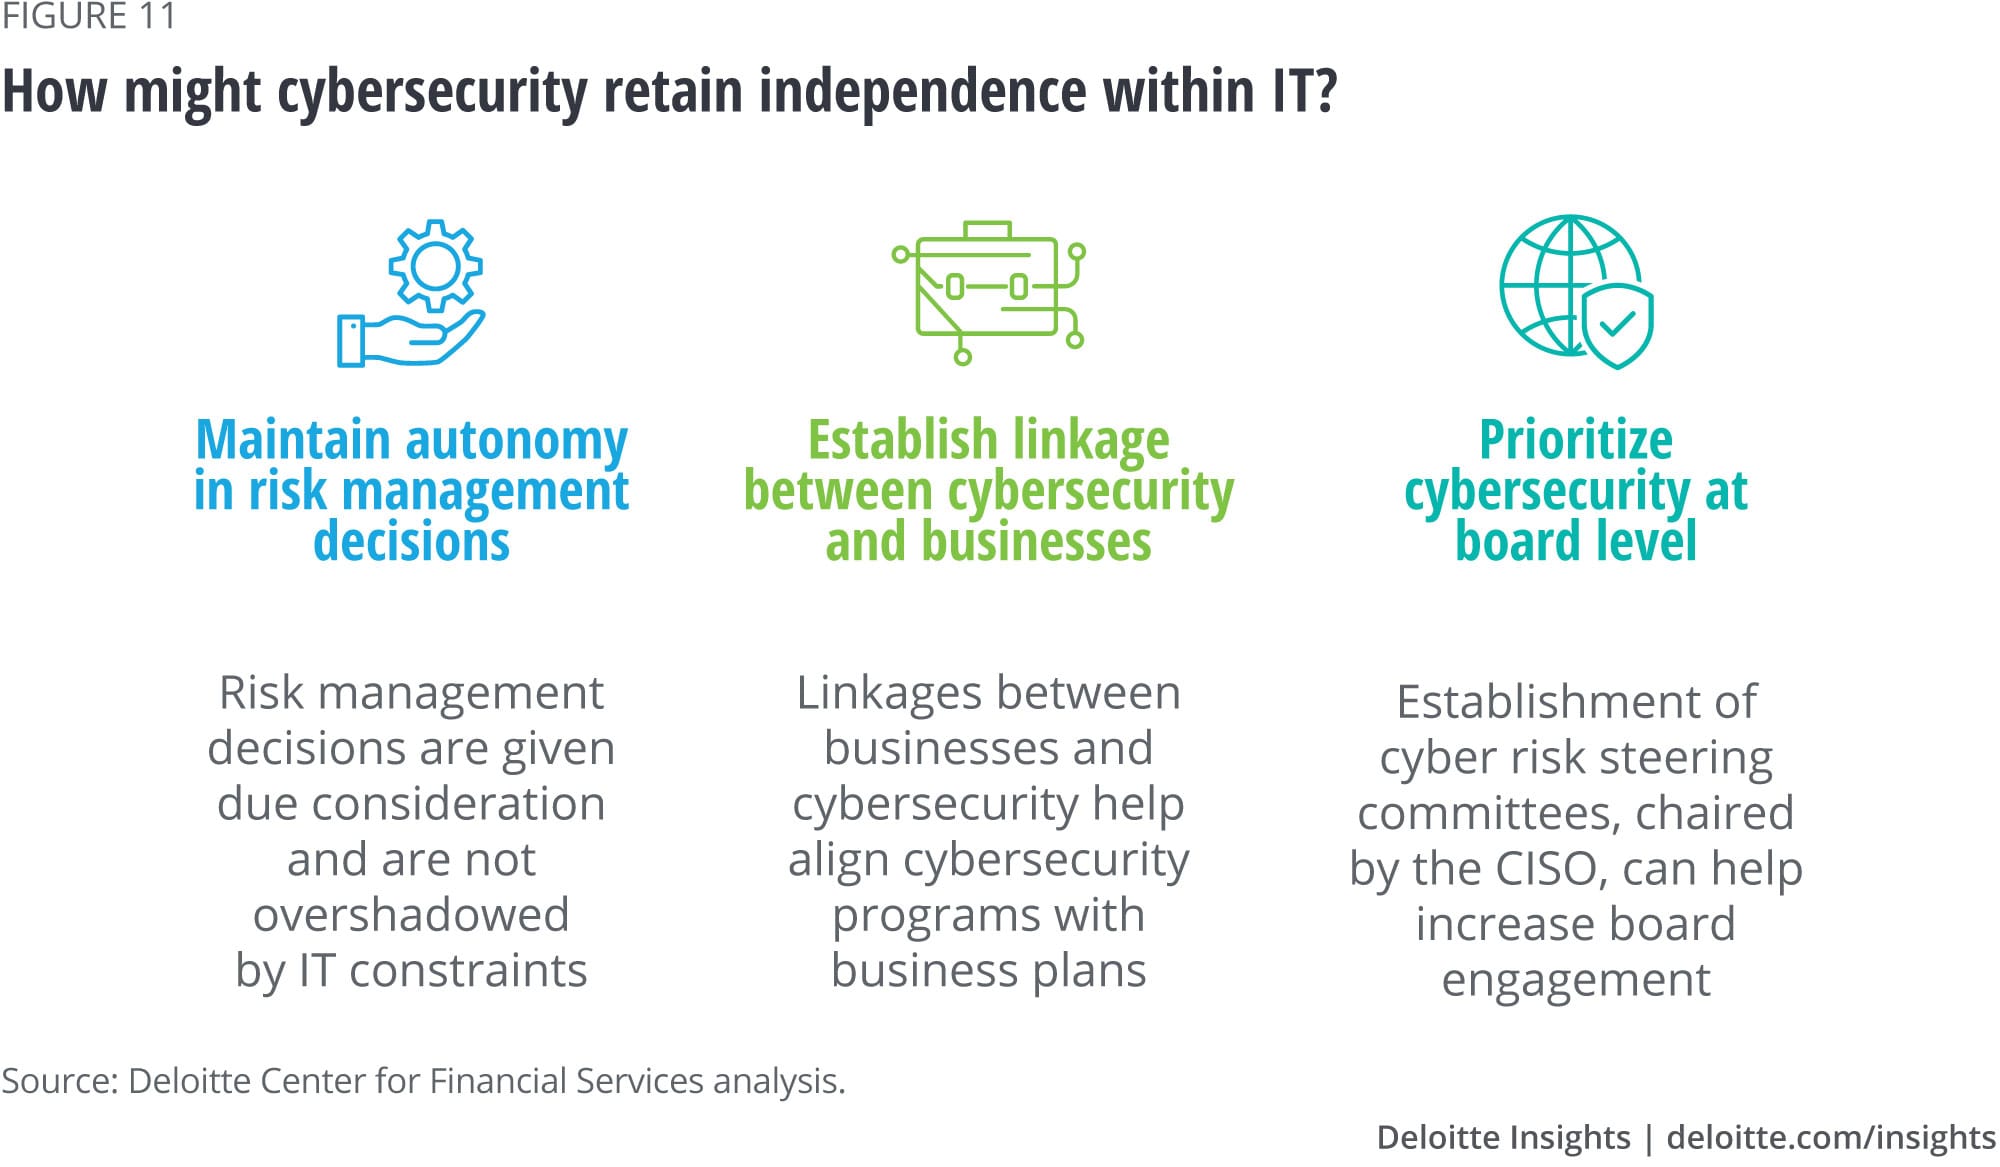 How might cybersecurity retain independence within IT?